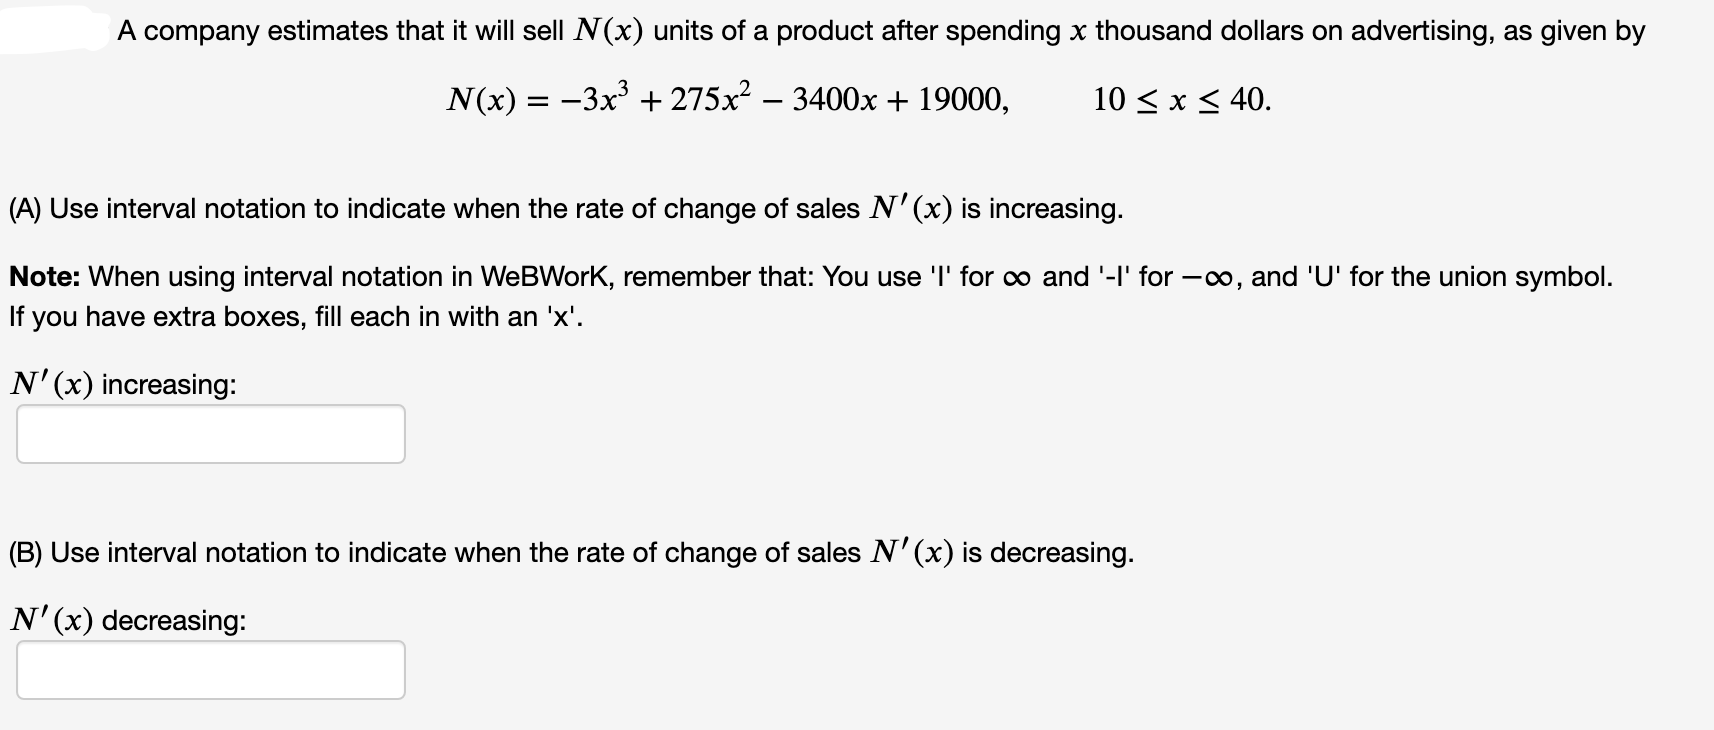 A company estimates that it will sell N(x) units of a product after spending x thousand dollars on advertising, as given by
N(x) = -3x + 275x² – 3400x + 19000,
10 < x < 40.
A) Use interval notation to indicate when the rate of change of sales N'(x) is increasing.
Note: When using interval notation in WeBWork, remember that: You use 'l' for o and '-l' for -00, and 'U' for the union symbol.
If you have extra boxes, fill each in with an 'x'.
N'(x) increasing:
(B) Use interval notation to indicate when the rate of change of sales N'(x) is decreasing.
N'(x) decreasing:
